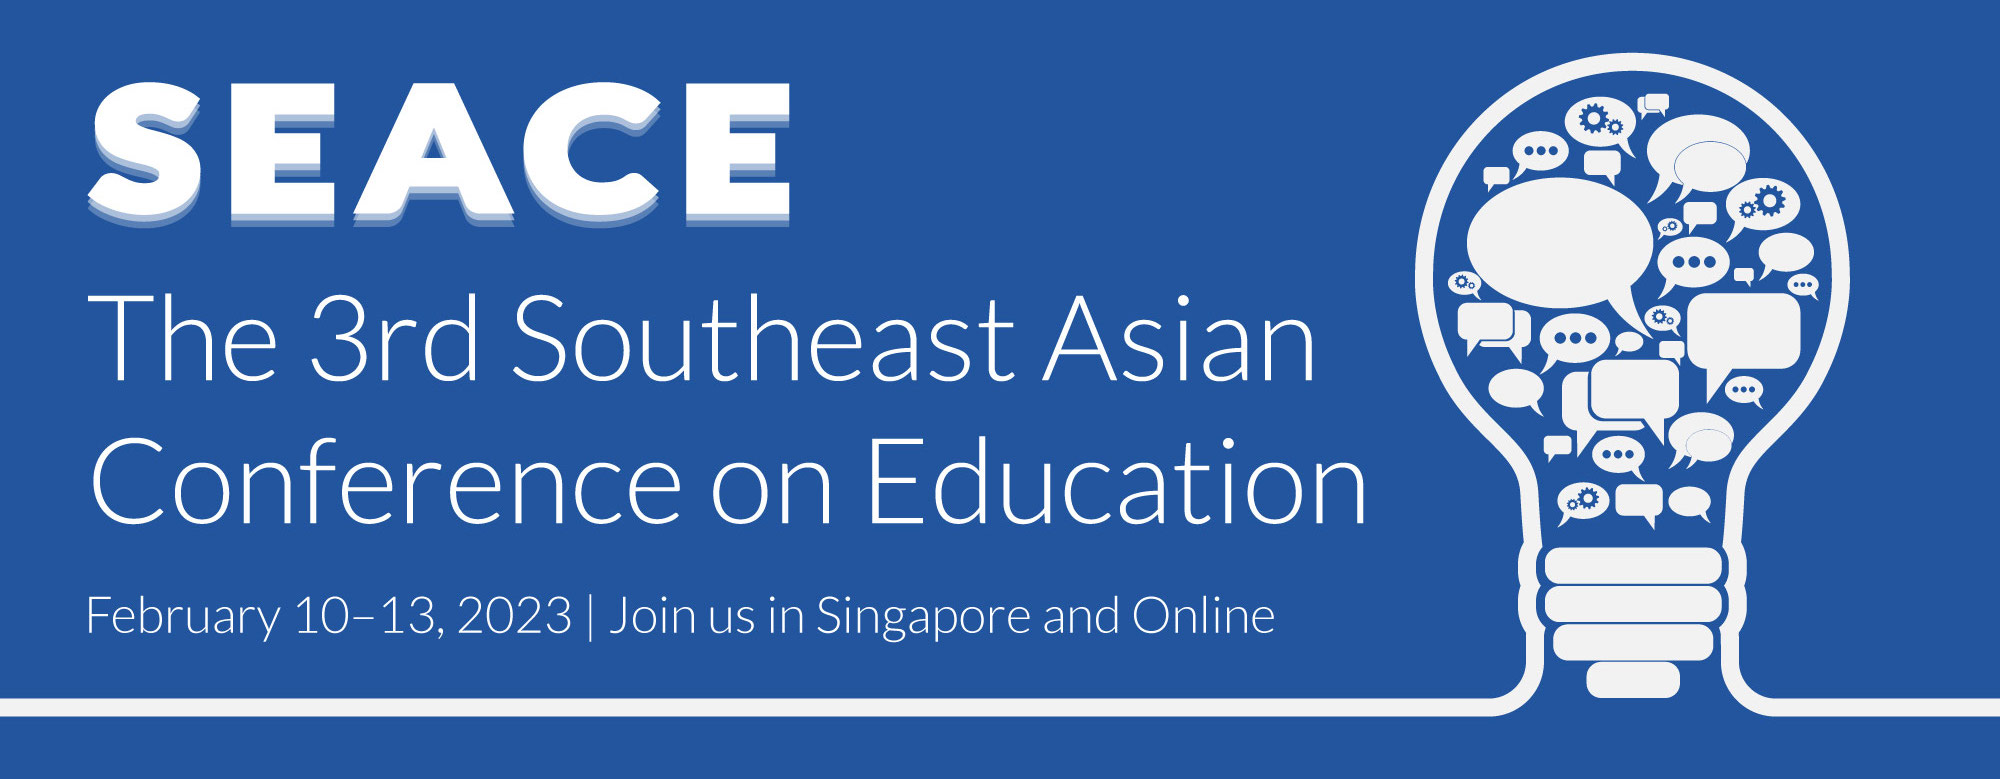 The 3rd Southeast Asian Conference on Education SEACE Singapore